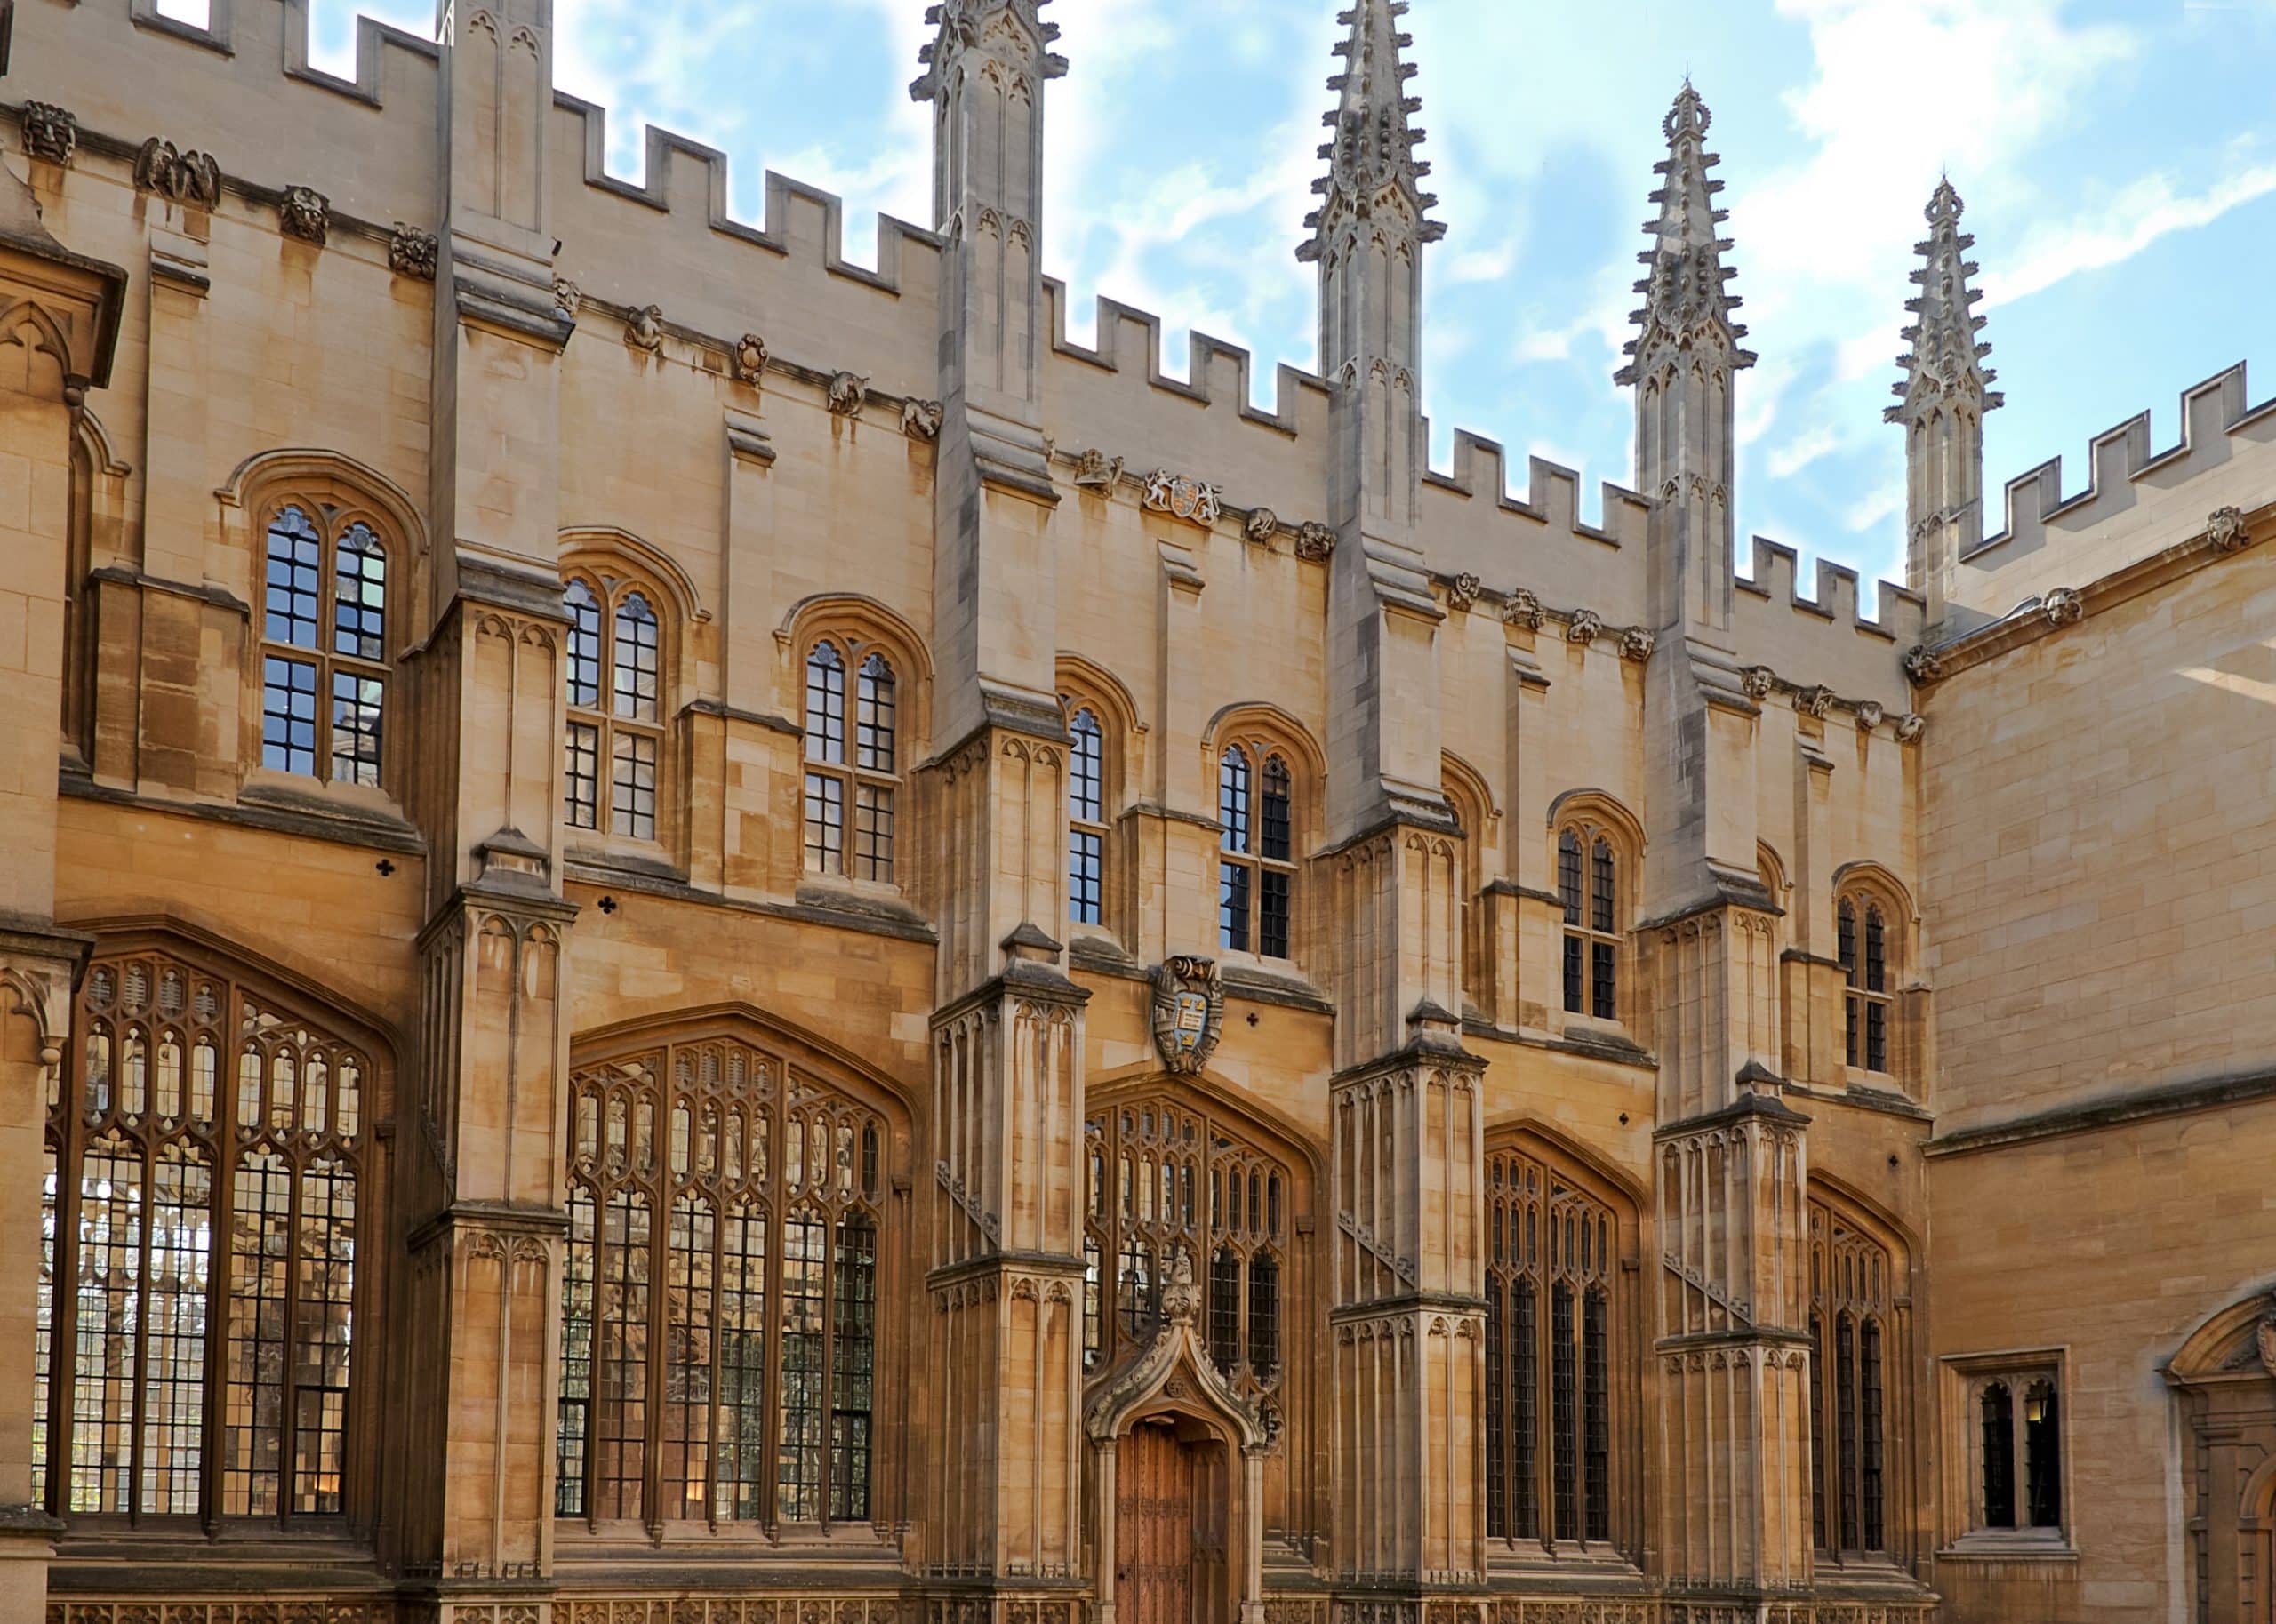 The Bodleian Library at the University of Oxford.